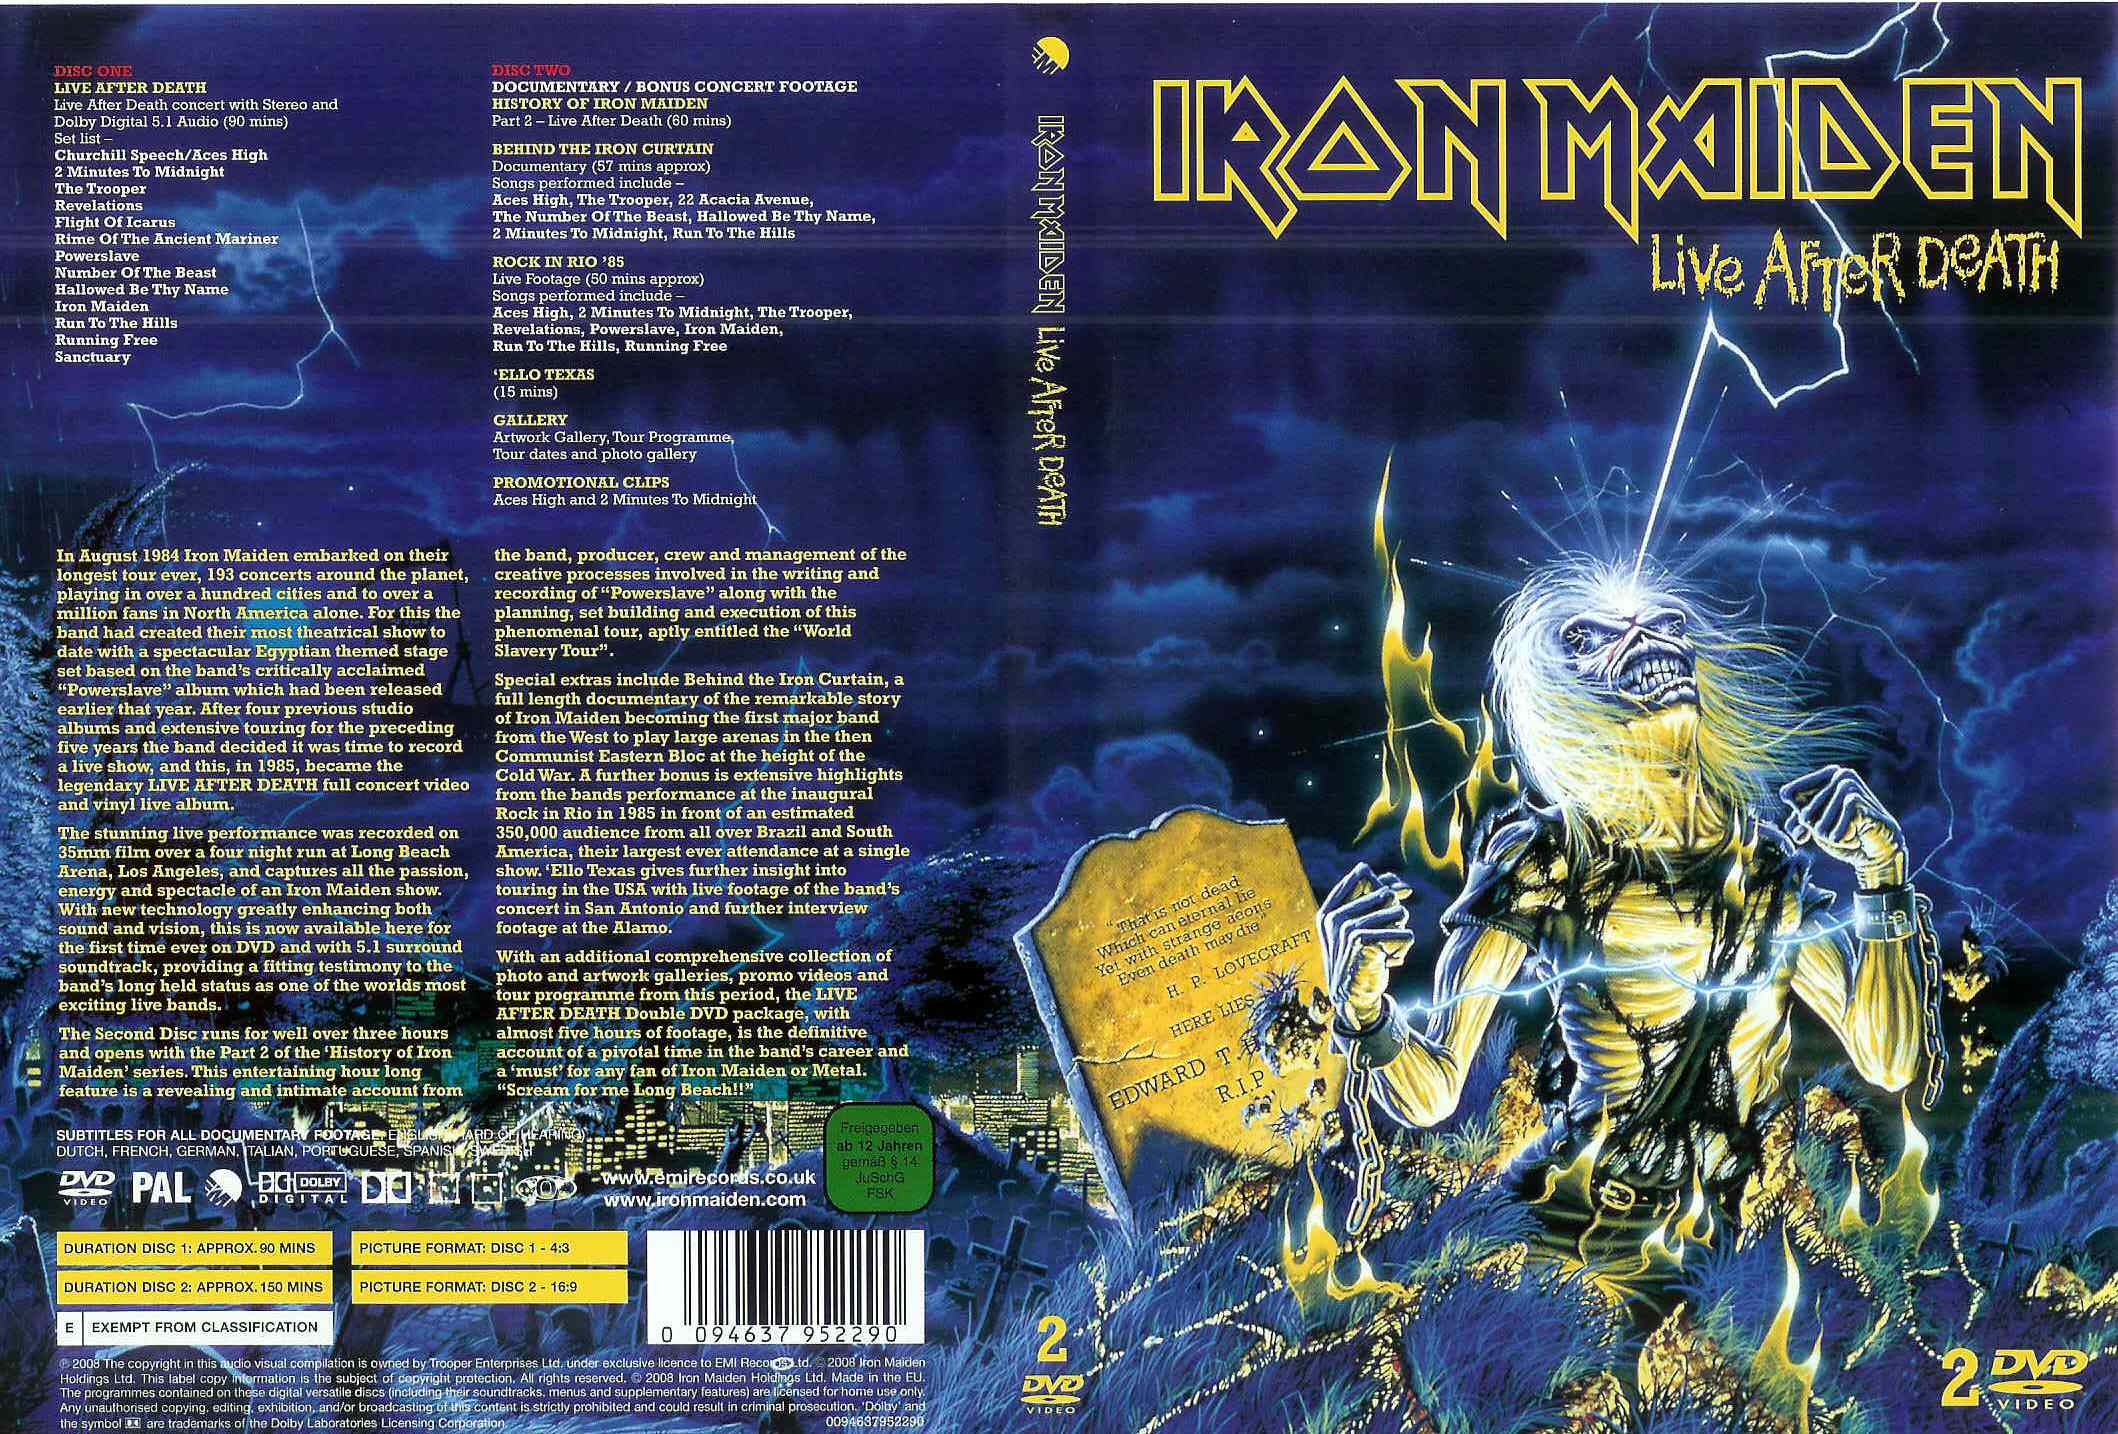 Jaquette DVD Iron Maiden - live after death v2